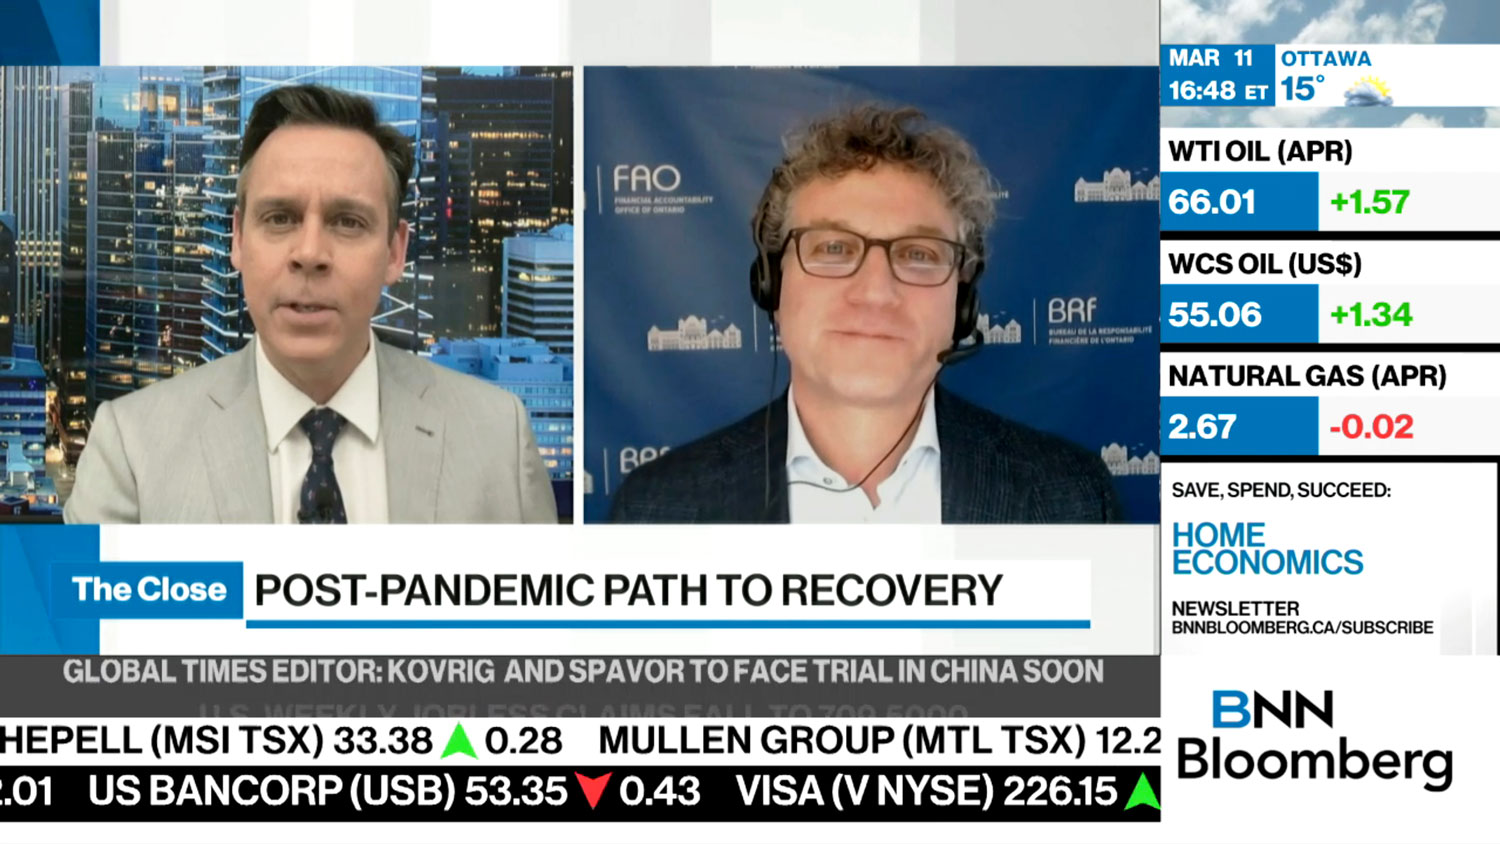 Peter Weltman on BNN Bloomberg's The Close with Greg Bonnell.